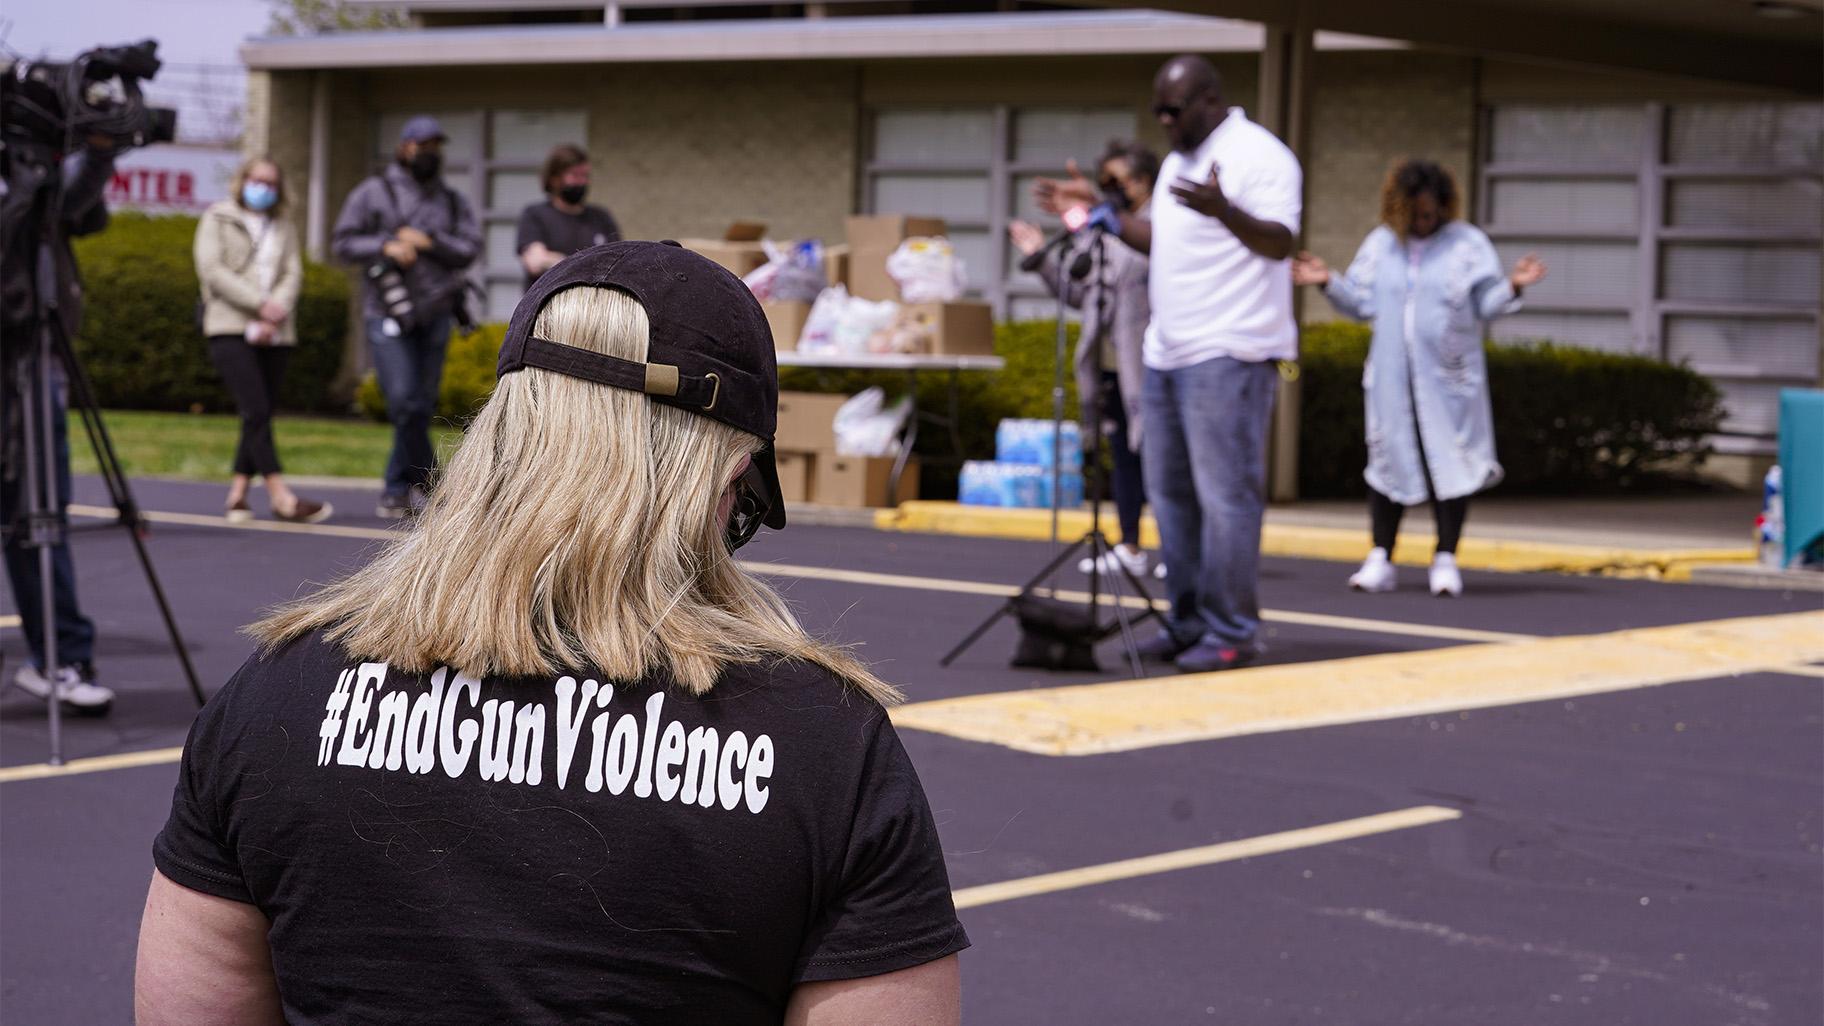 A woman wears a shirt calling for the end of gun violence during a vigil at the Olivet Missionary Baptist Church for the victims of the shooting at a FedEx facility in Indianapolis, Saturday, April 17, 2021. A gunman killed eight people and wounded several others before taking his own life in a late-night attack at a FedEx facility near the Indianapolis airport, police said. (AP Photo / Michael Conroy)